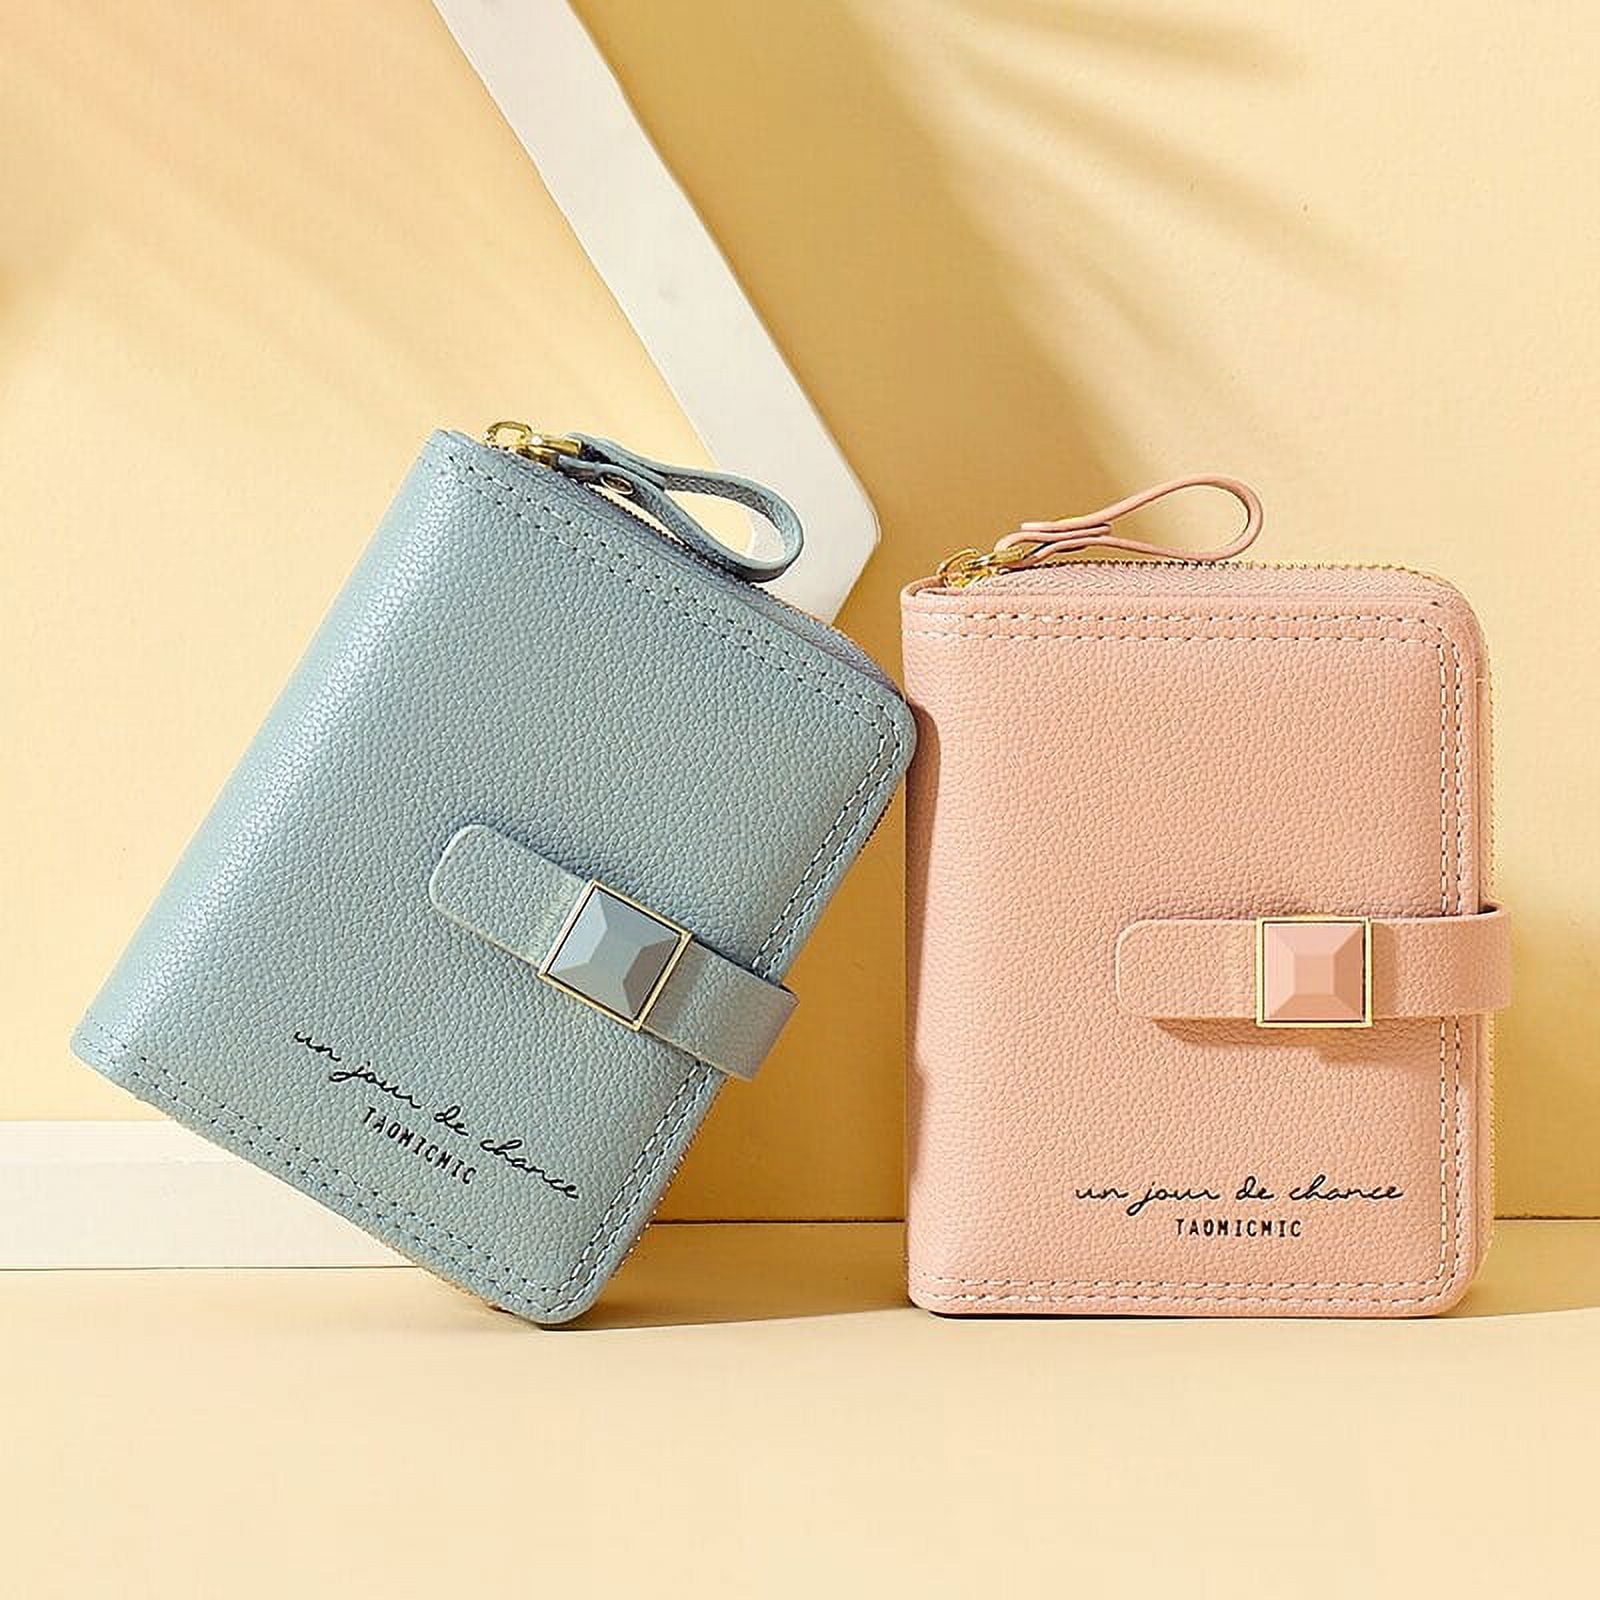 QWZNDZGR High Quality Matte Leather Women Wallet With Zipper Coin Purse  Card Holder Brand Designer Female Wallets Ladies Small Purse 